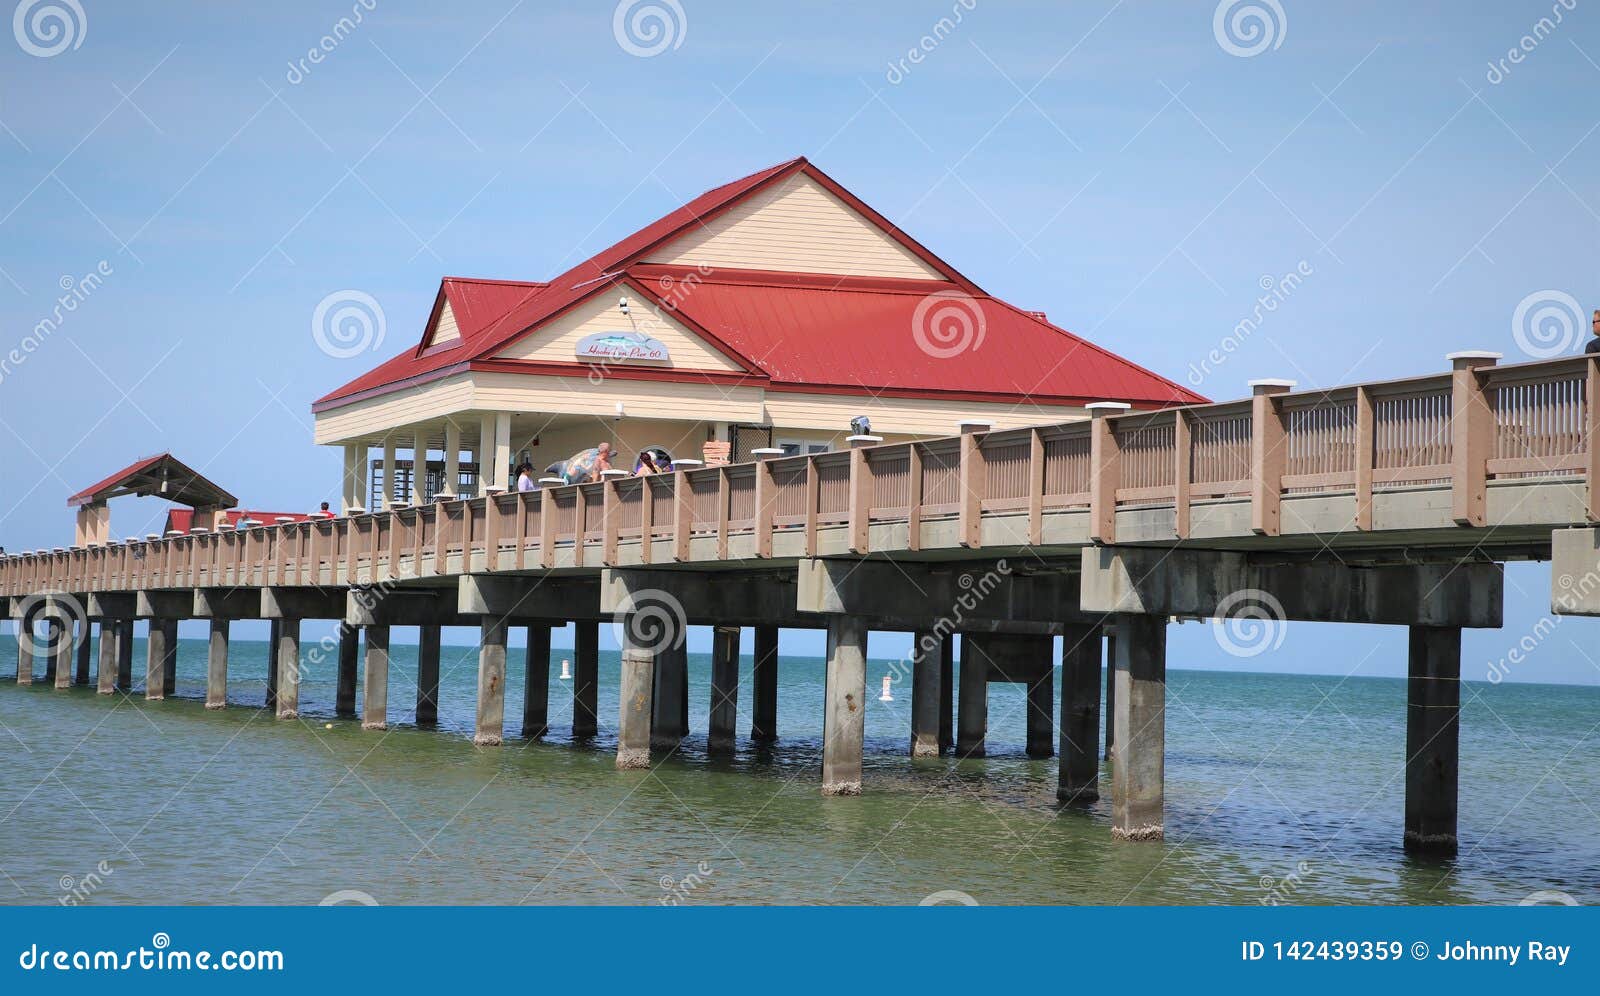 Pier 60 in Clearwater Beach Florida Stock Image - Image of friendly,  francisco: 142439359